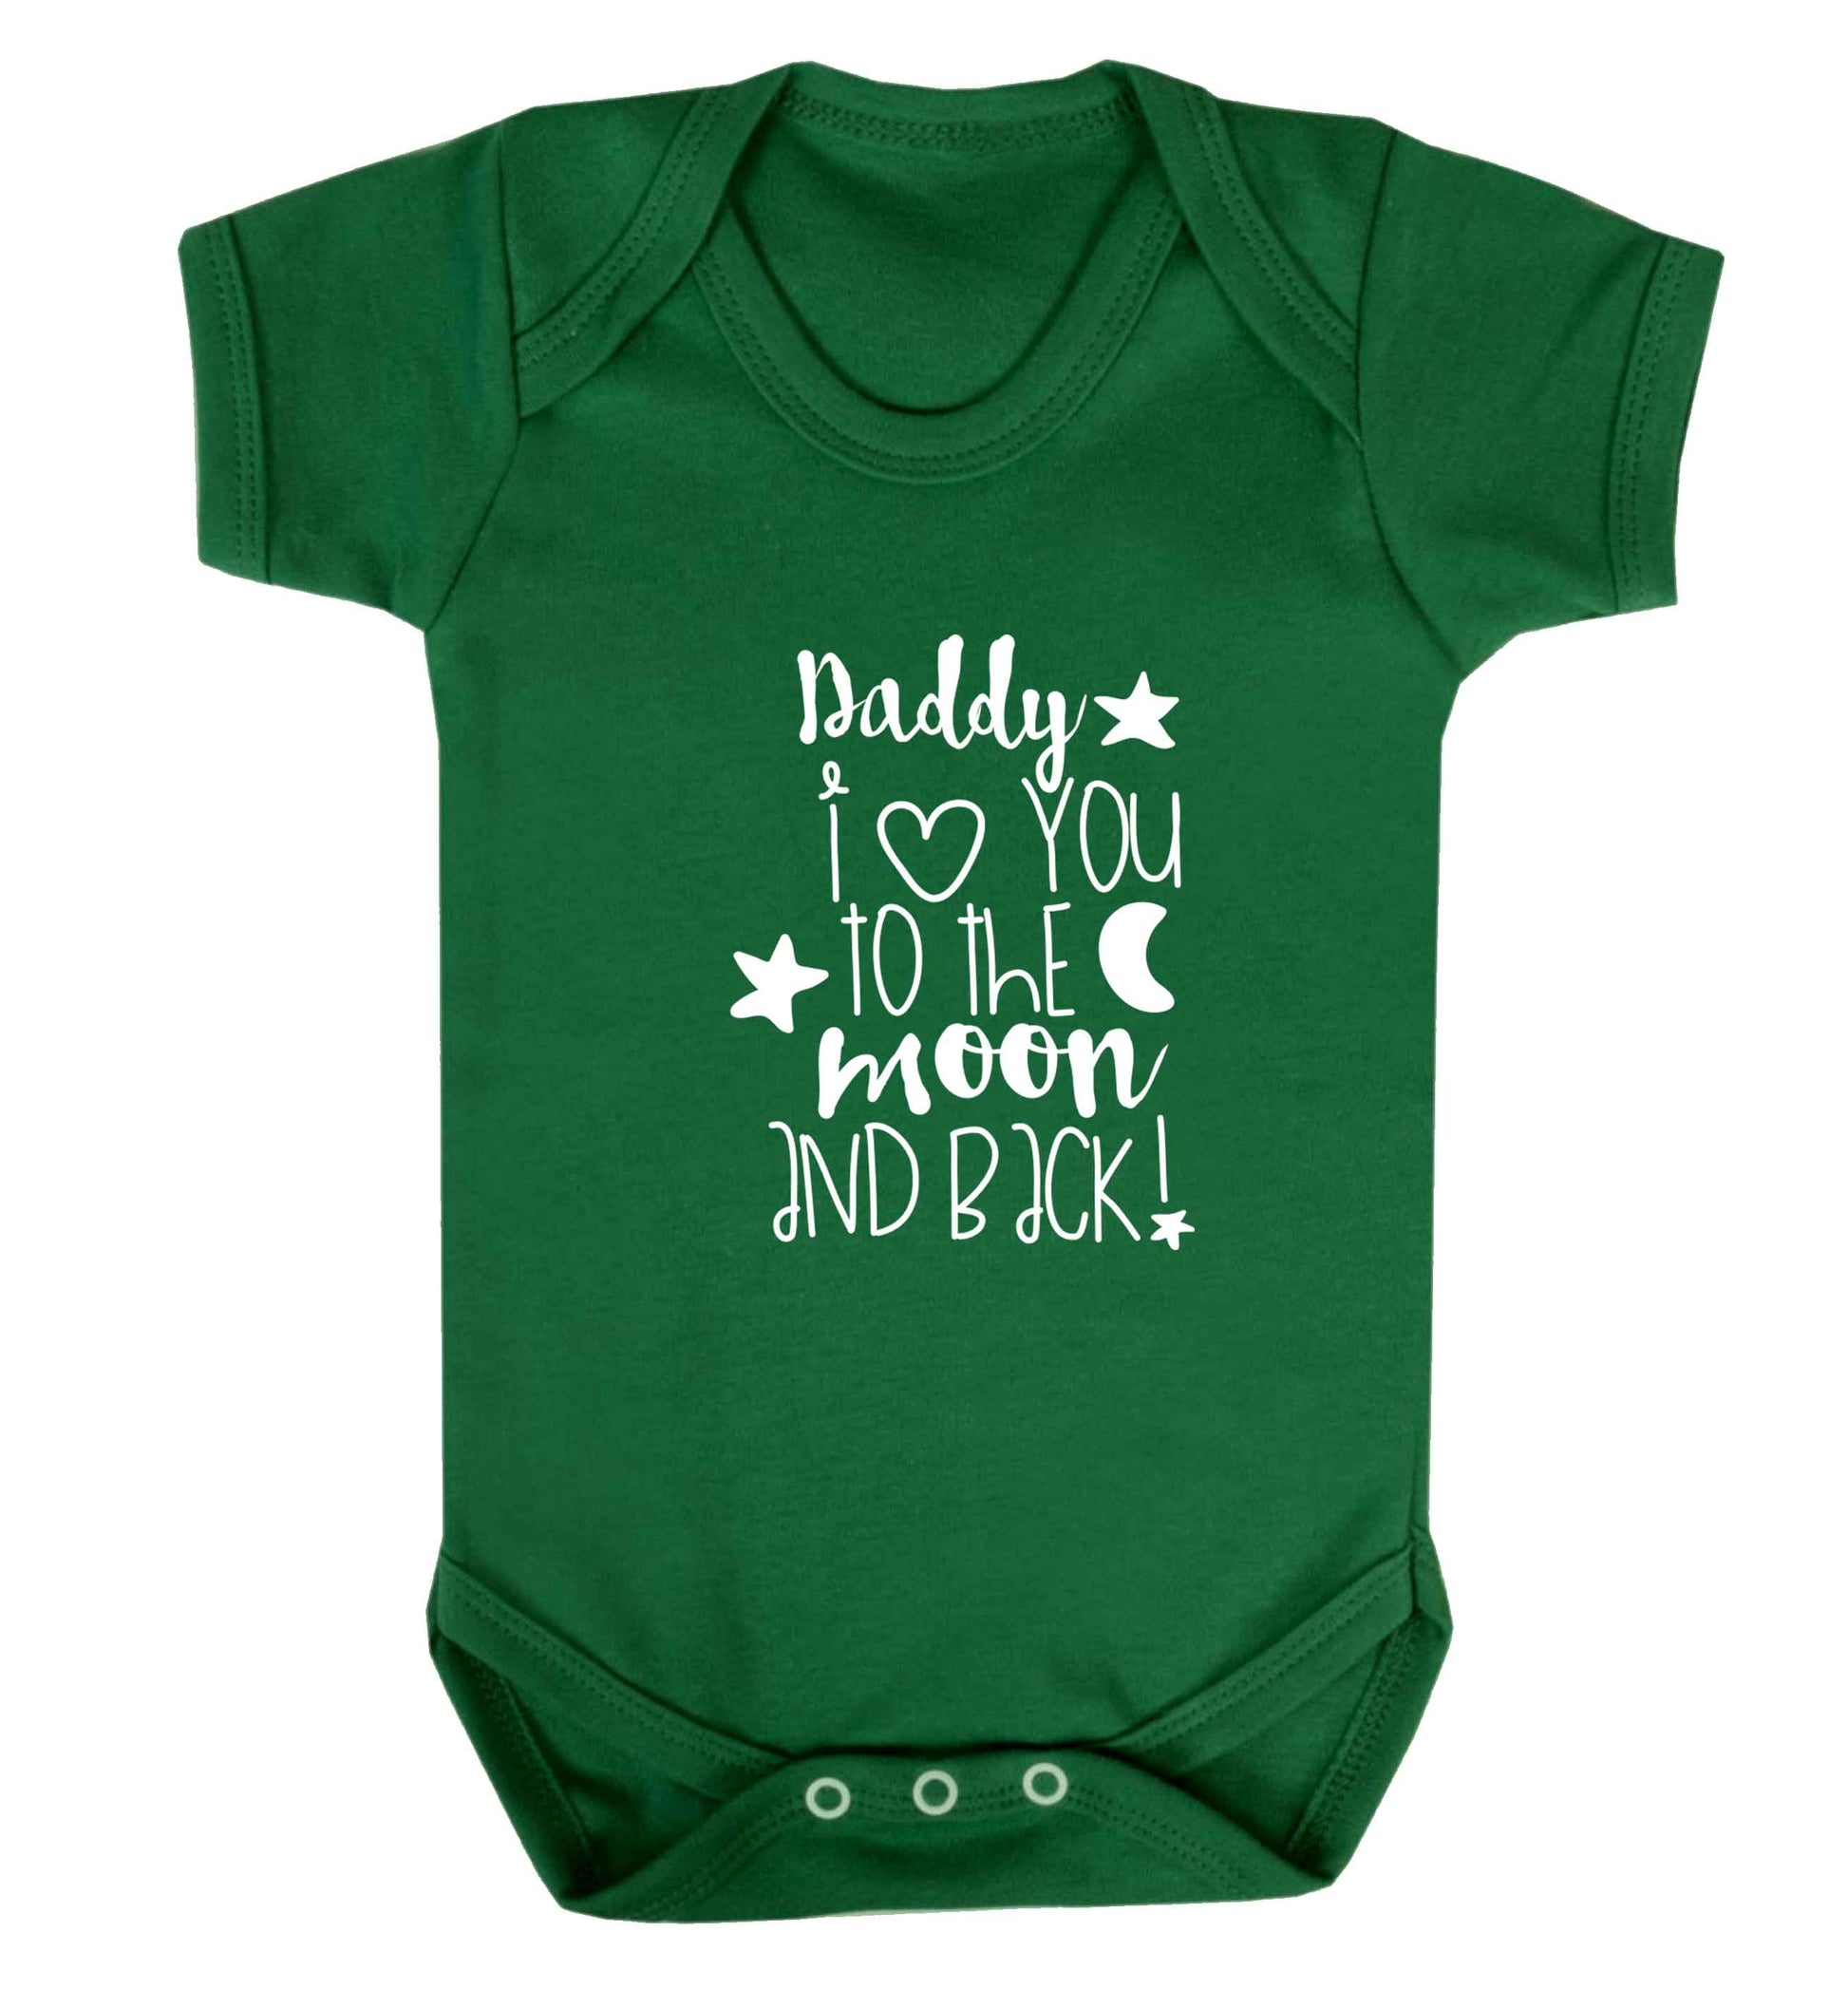 Daddy I love you to the moon and back baby vest green 18-24 months